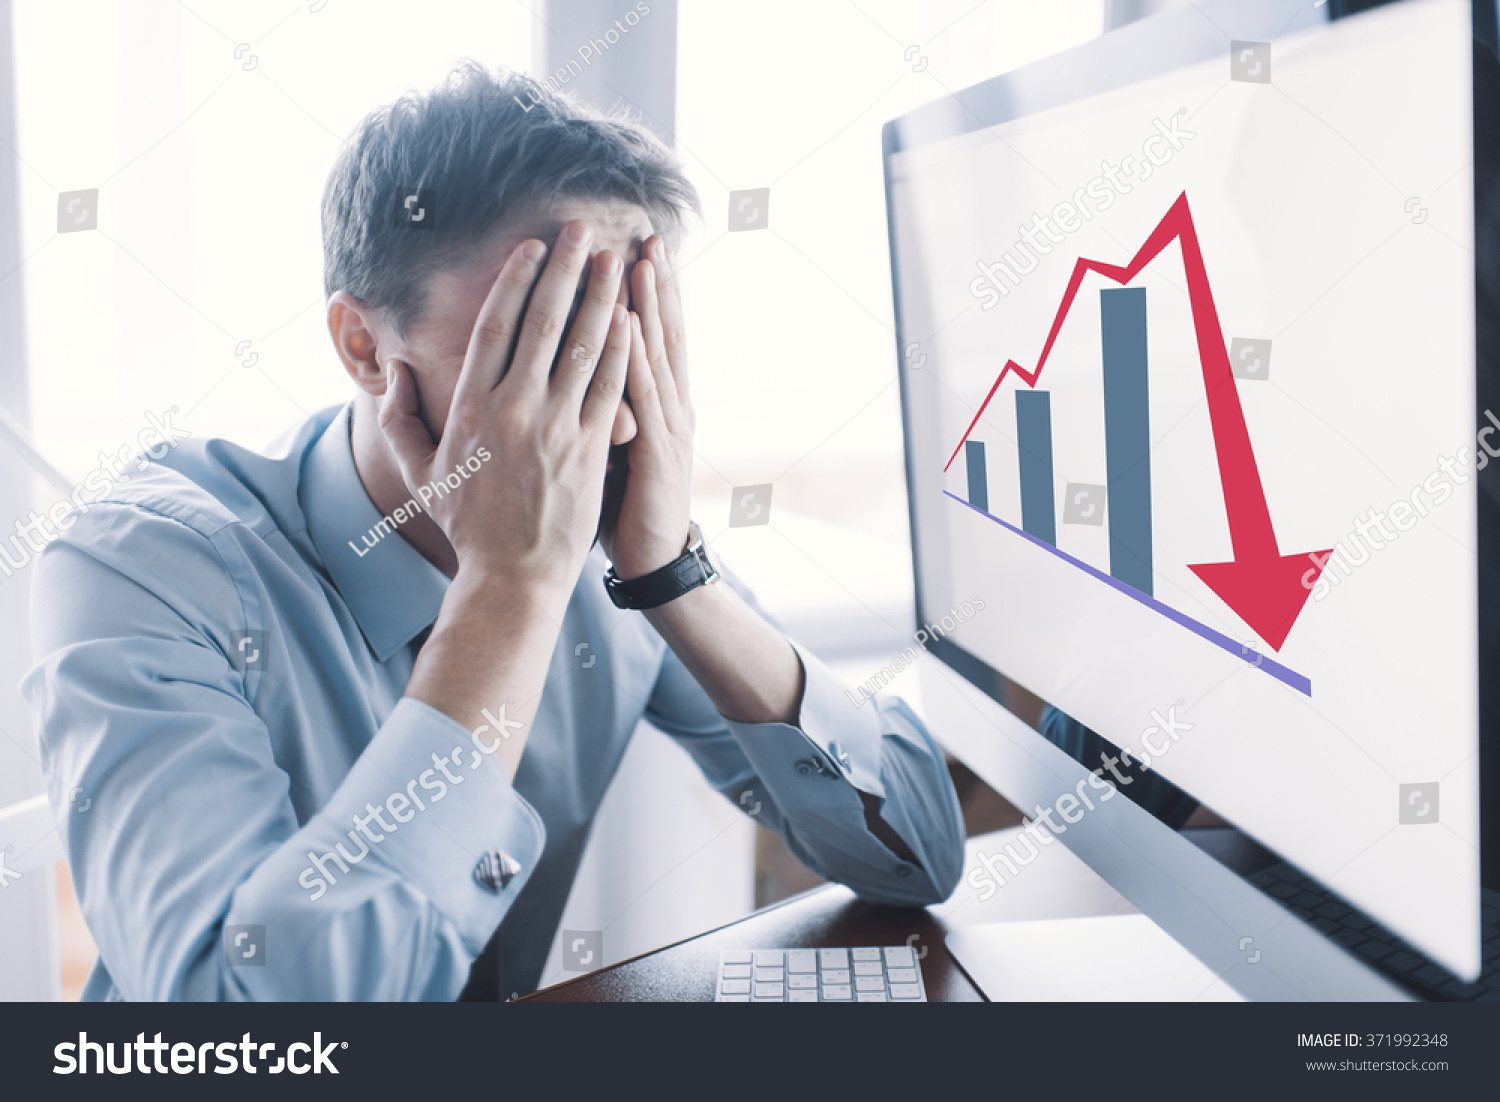 Frustrated stressed shocked business man with financial market chart graphic going down on grey office wall background. Poor economy concept. Face expression, emotion, reaction #371992348